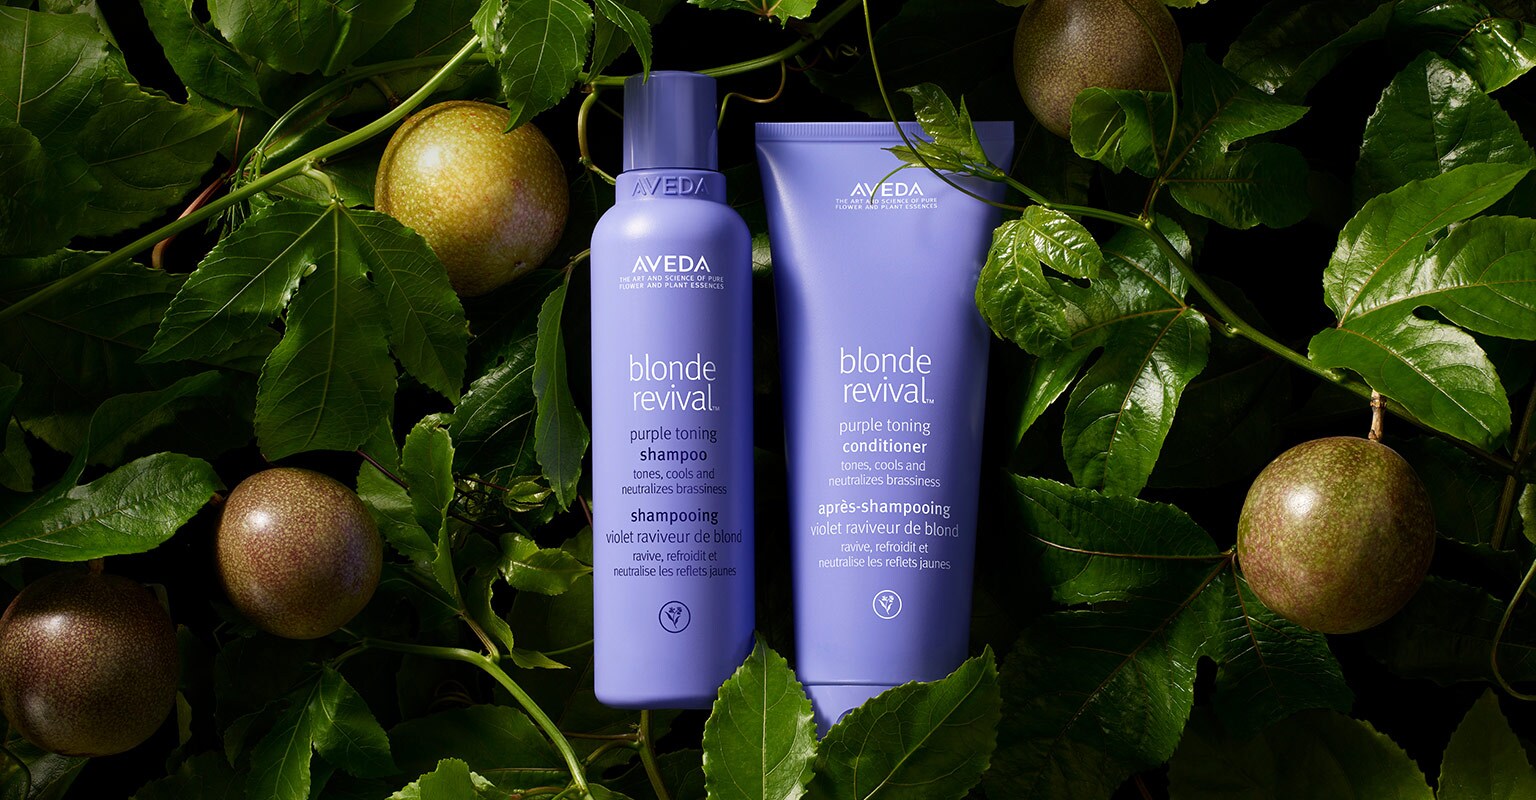 Blonde revival purple shampoo and conditioner is 96% naturally derived, vegan, cruelty-free, sulfate cleanser free & silicone fr